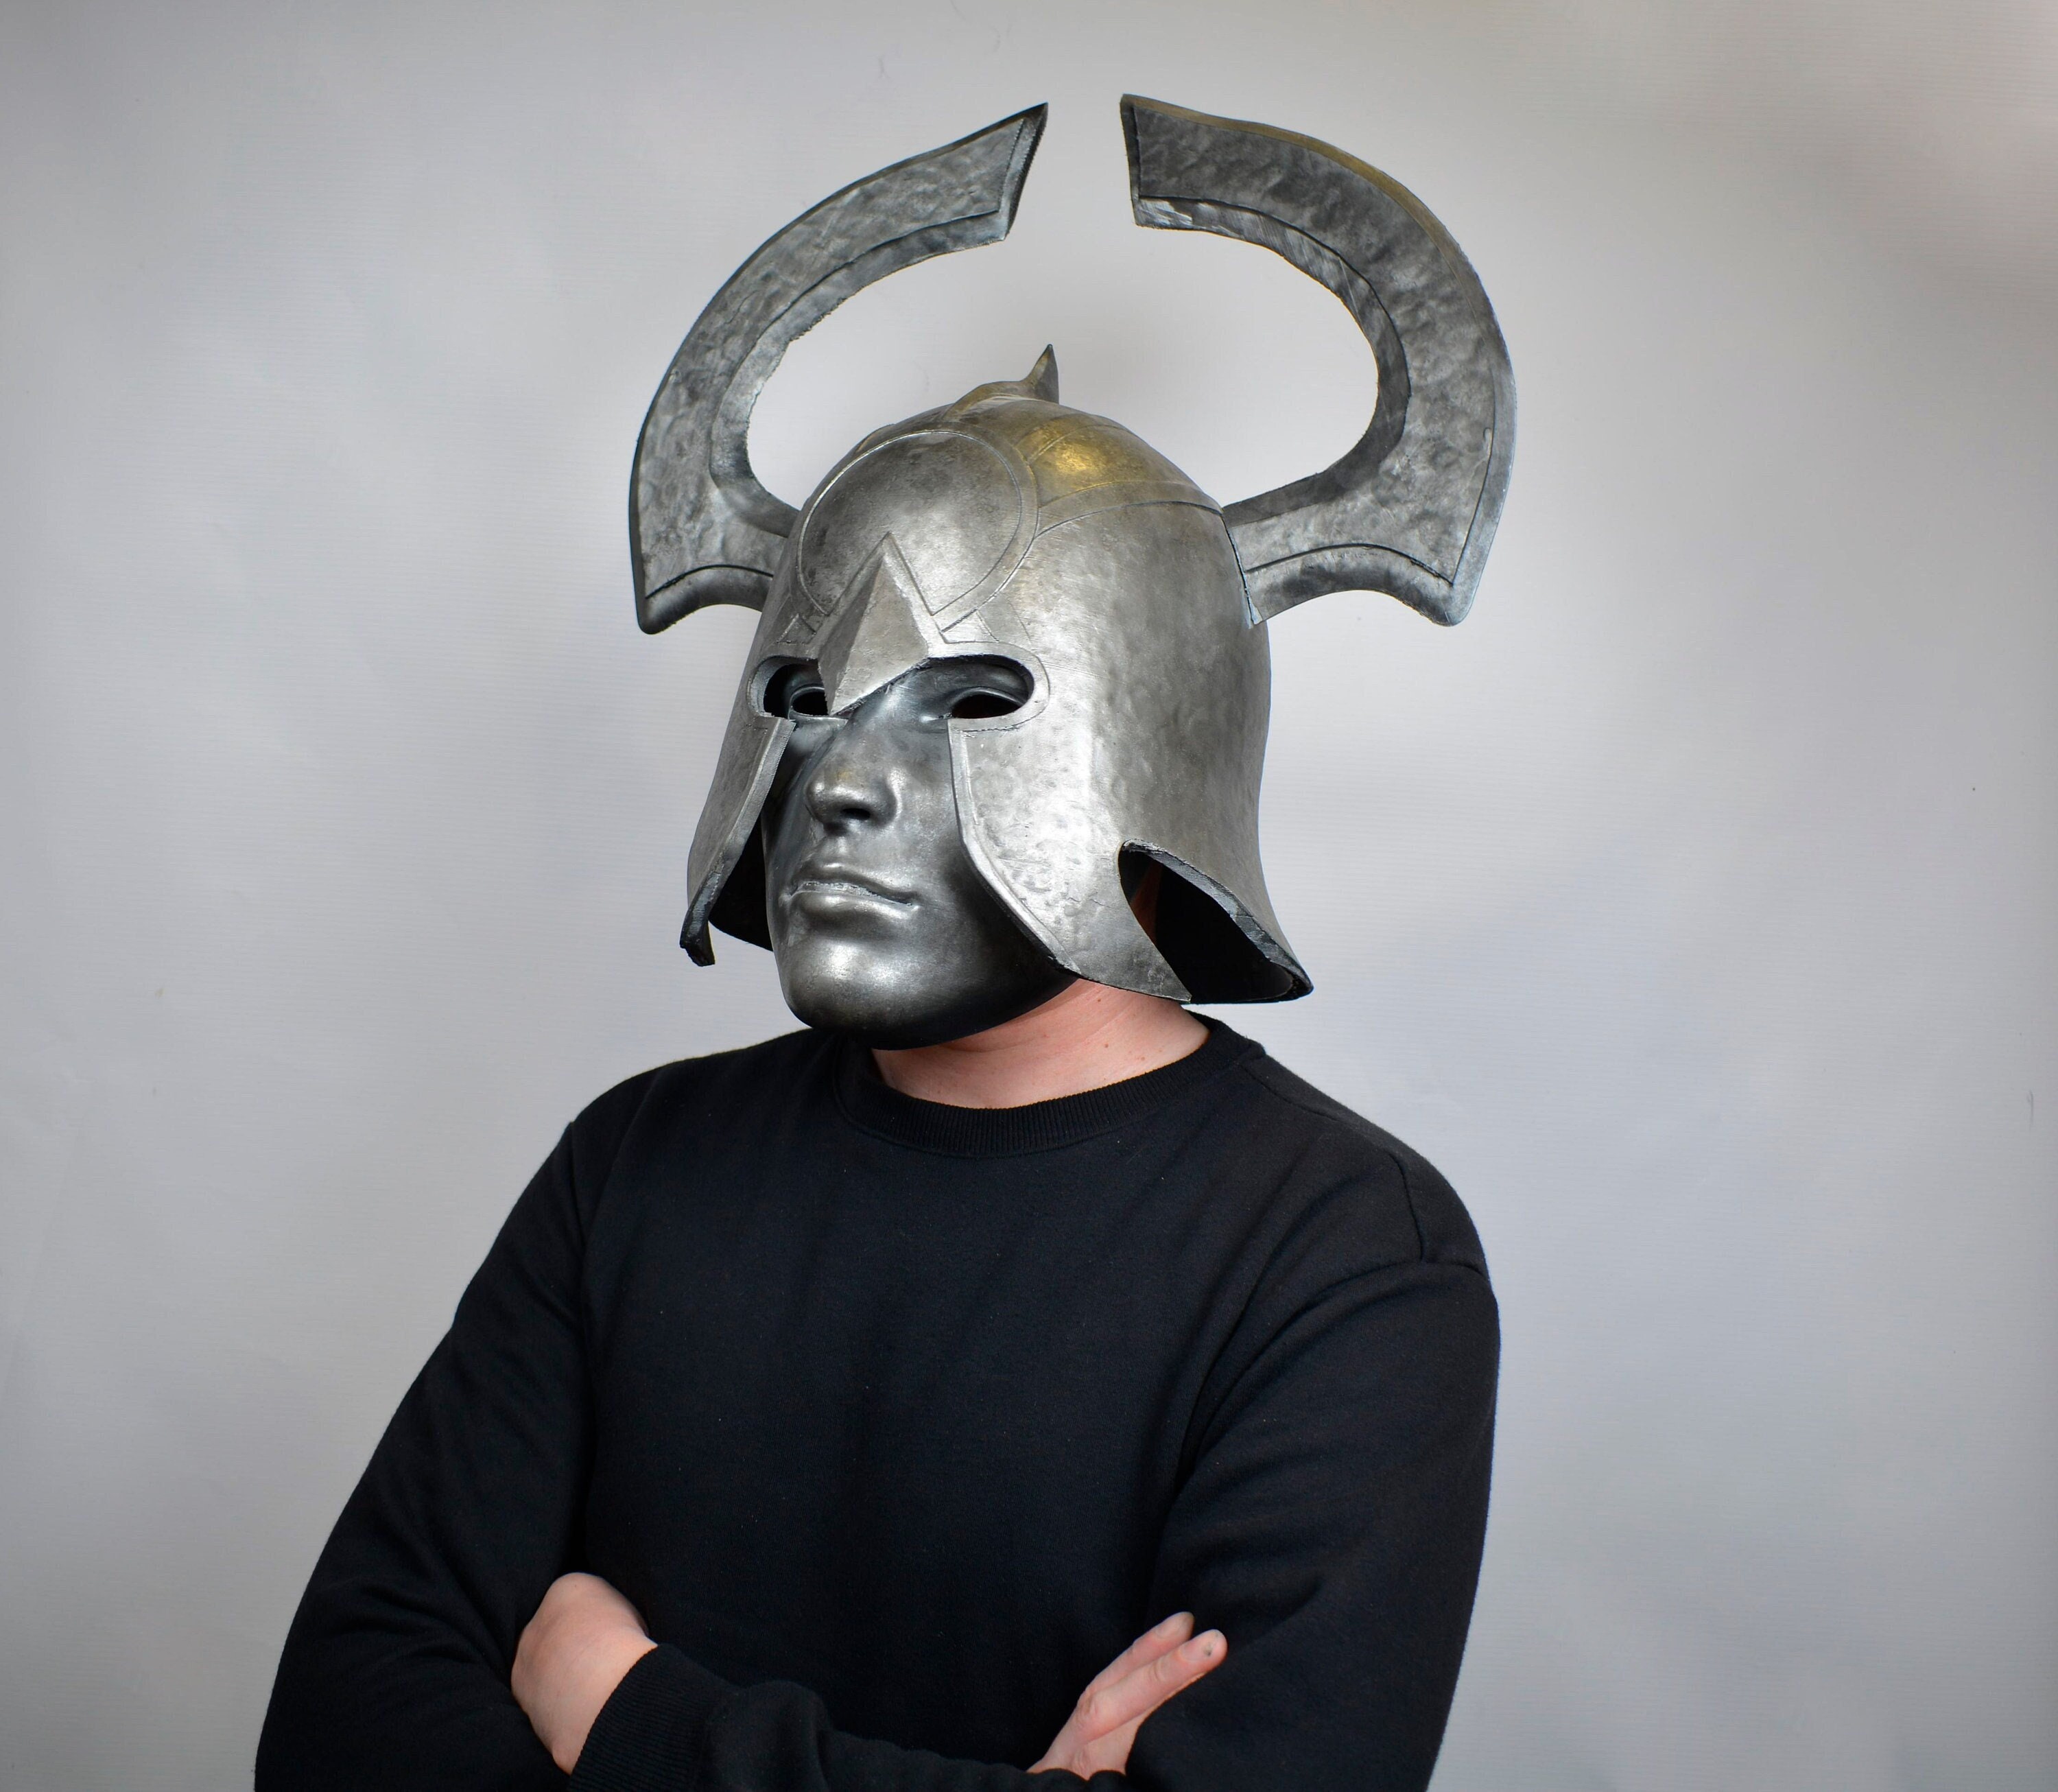 VikingValhallaLeif American Medieval Player Unknown's Battlegrounds Level 3 Helmet for Cosplay for Pub G Lover's Best Gift Him